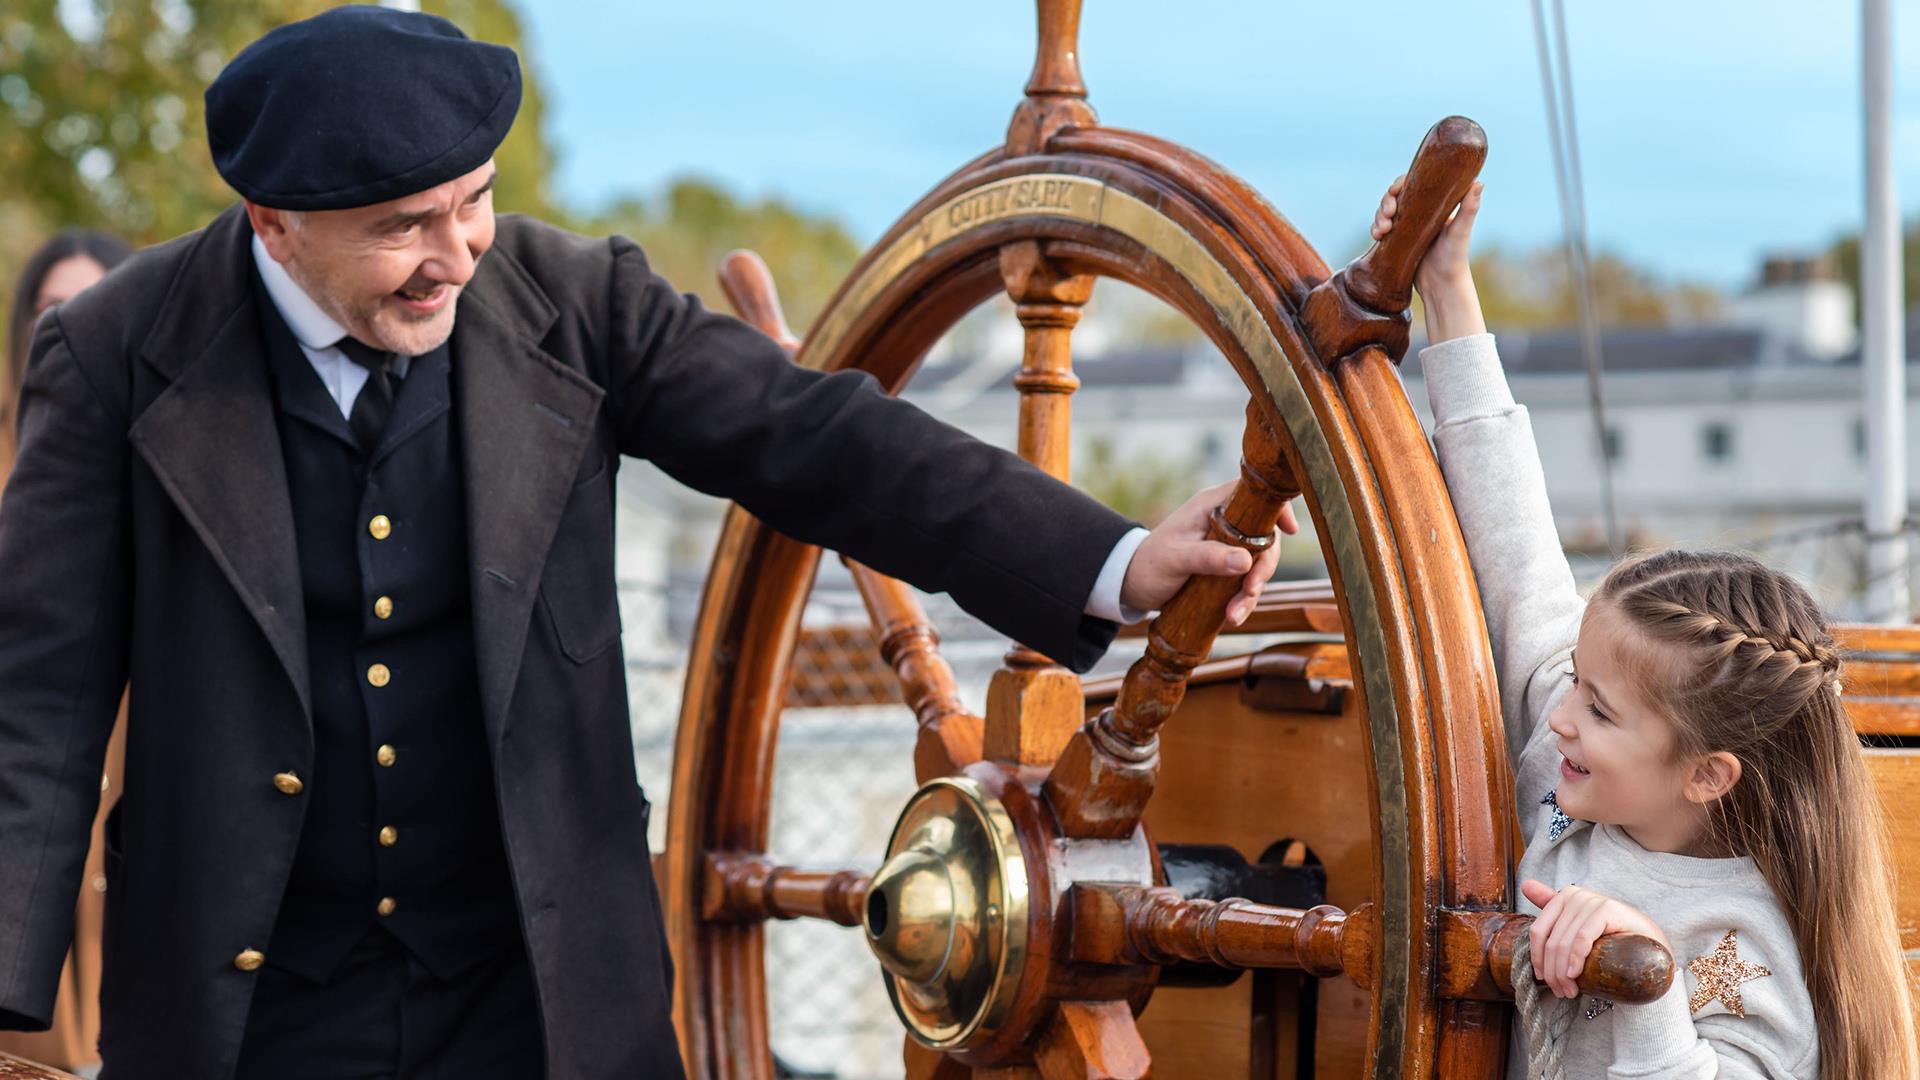 A girl holds on to the wheel of the Cutty Sark in Greenwich while an actor dressed as the captain looks on.